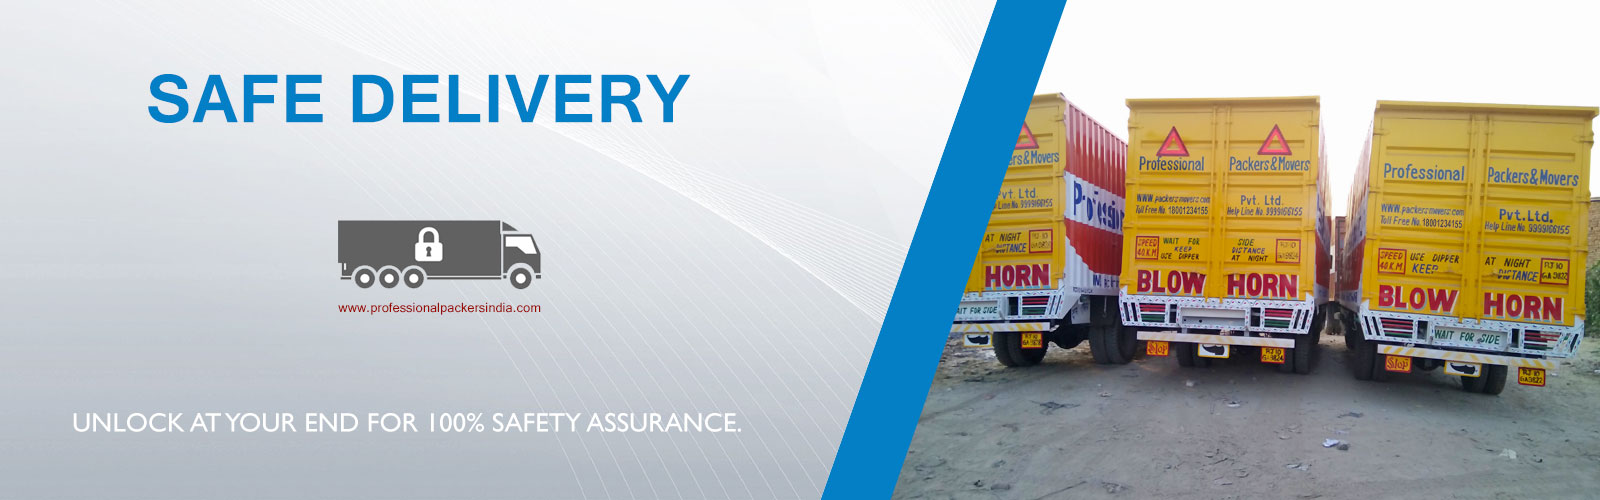 Movers Packers Budh Vihar Delhi company move your belongings fast and in an efficient manner by integrating top-notch packaging material, dedicated staff and global-class technology.